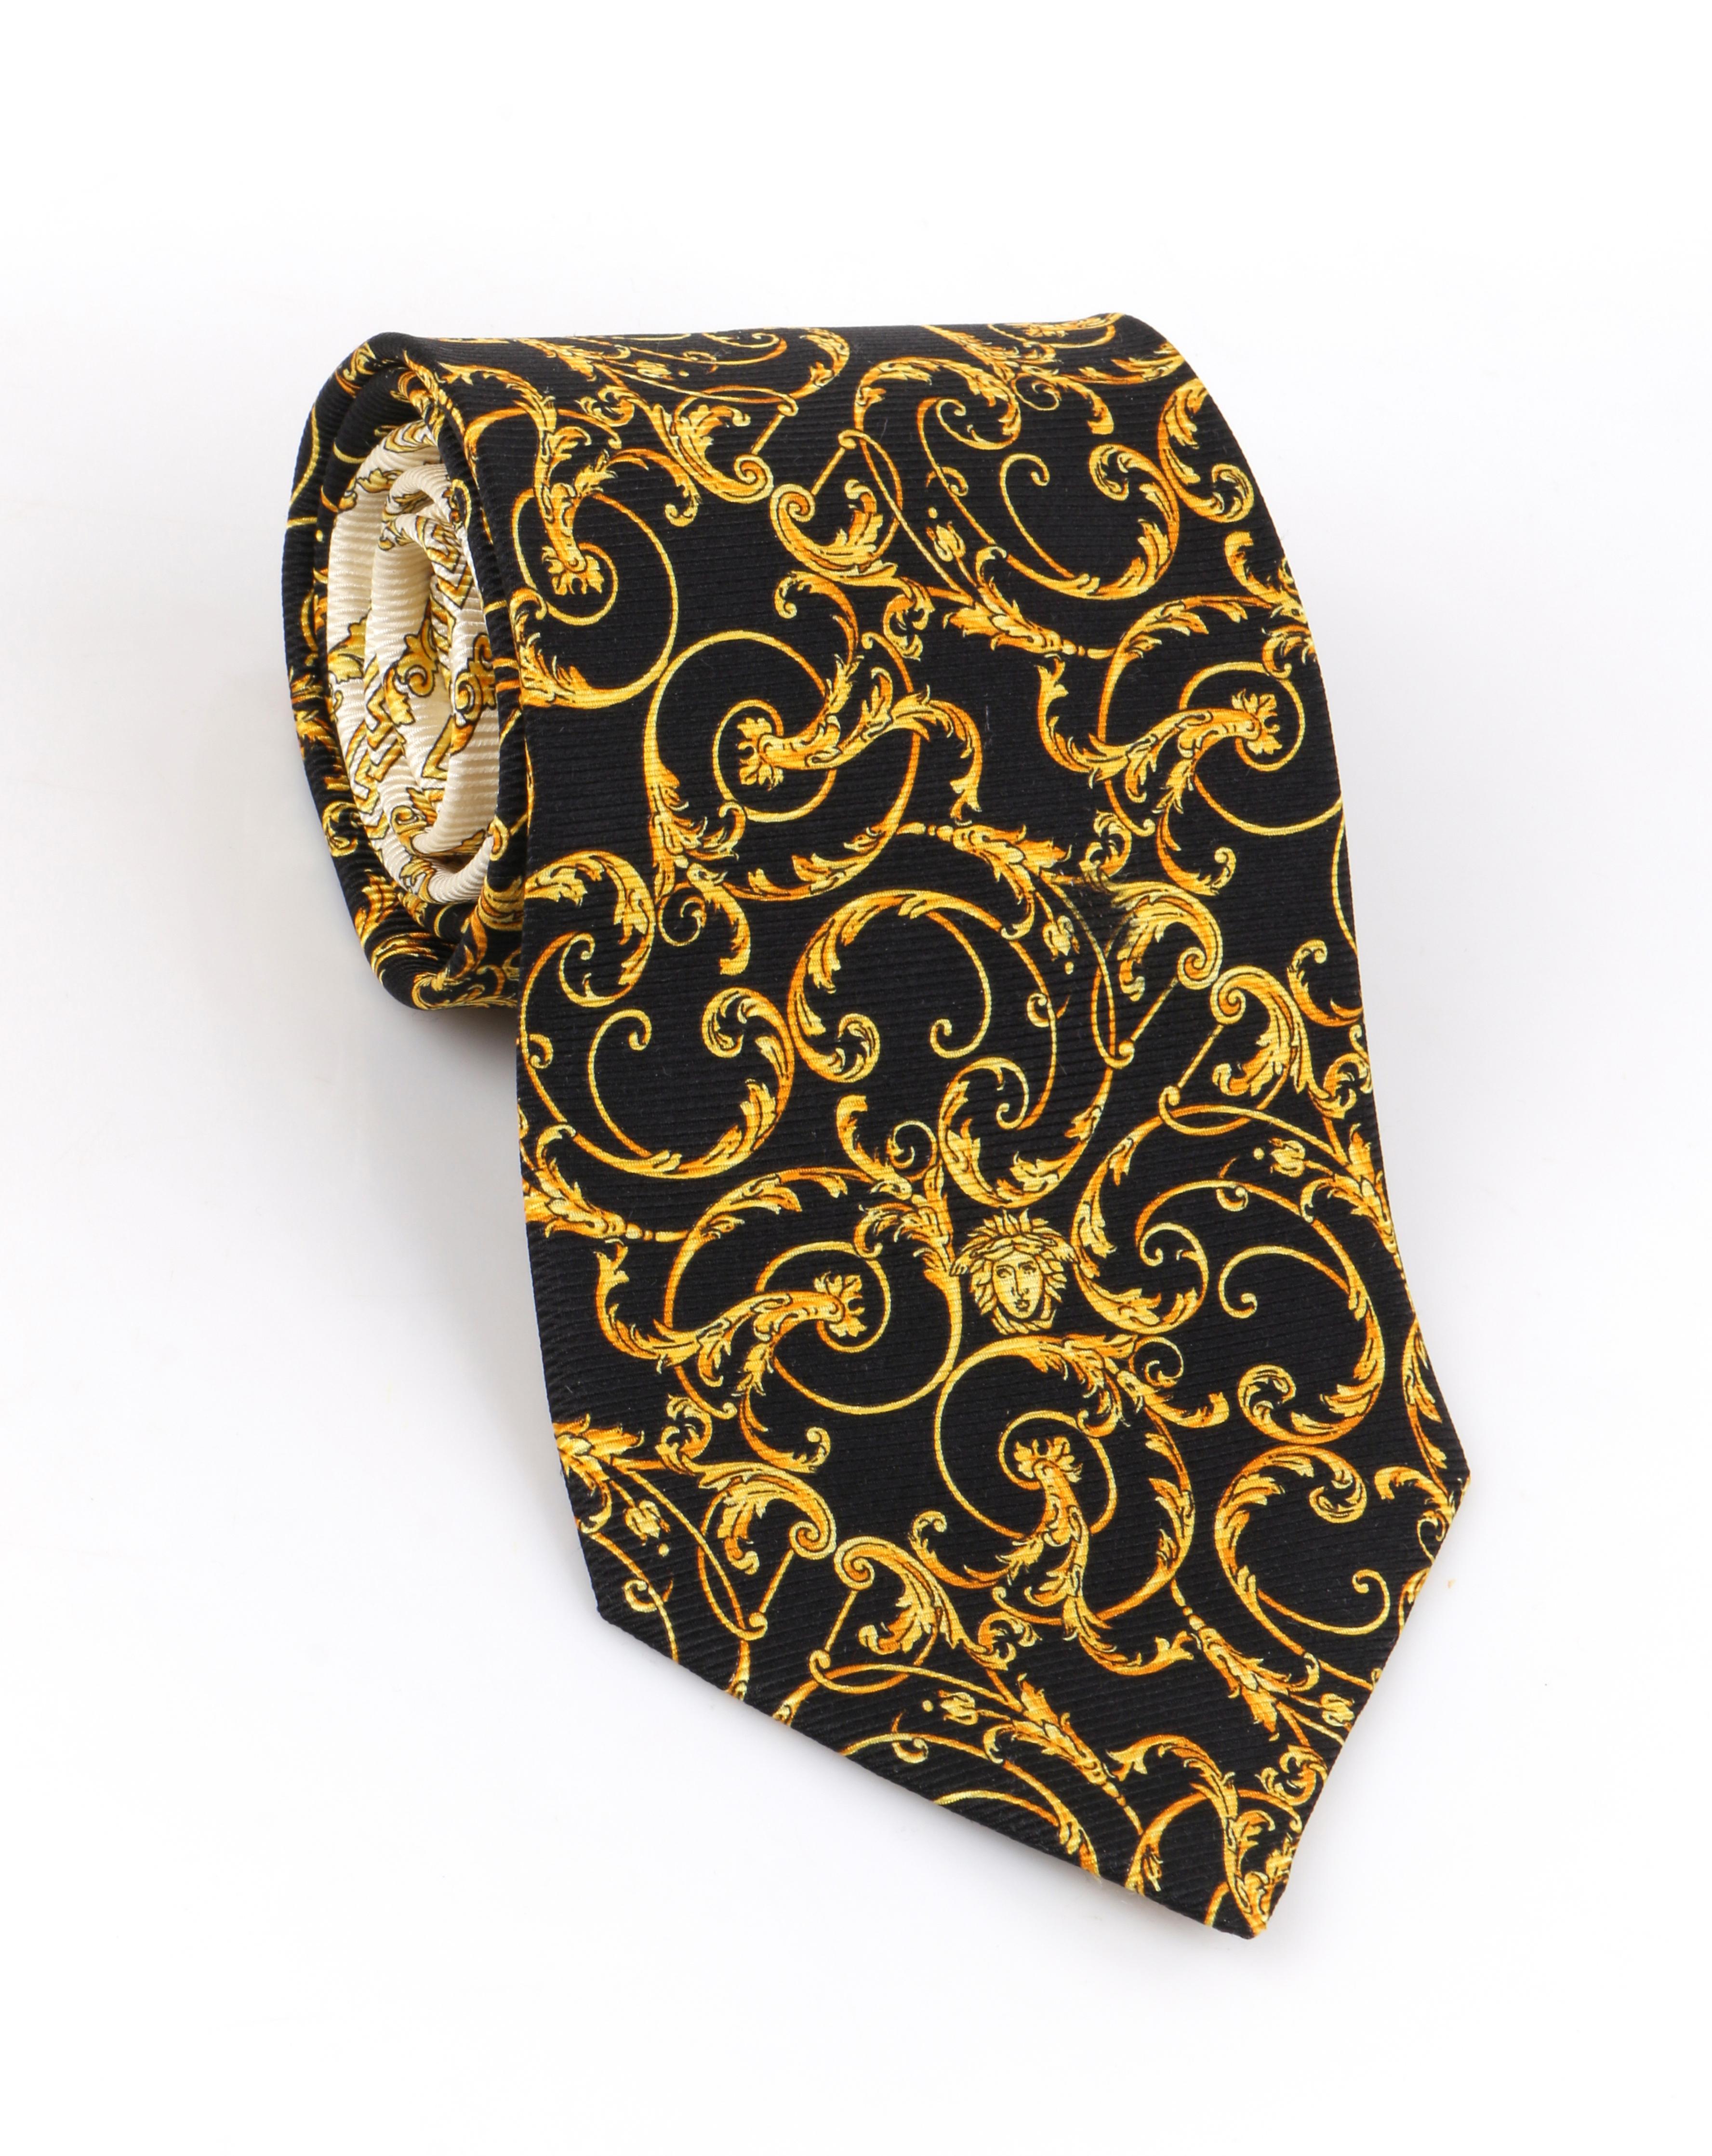 DESCRIPTION: GIANNI VERSACE c.1990's Baroque Medusa Head Print Silk Necktie Tie
 
Circa: c.1990’s
Label(s): Gianni Versace
Style: Necktie
Designer: 
Color(s): Shades of black, cream, and gold
Lined: Yes
Marked Fabric Content: 100% Silk
Unmarked